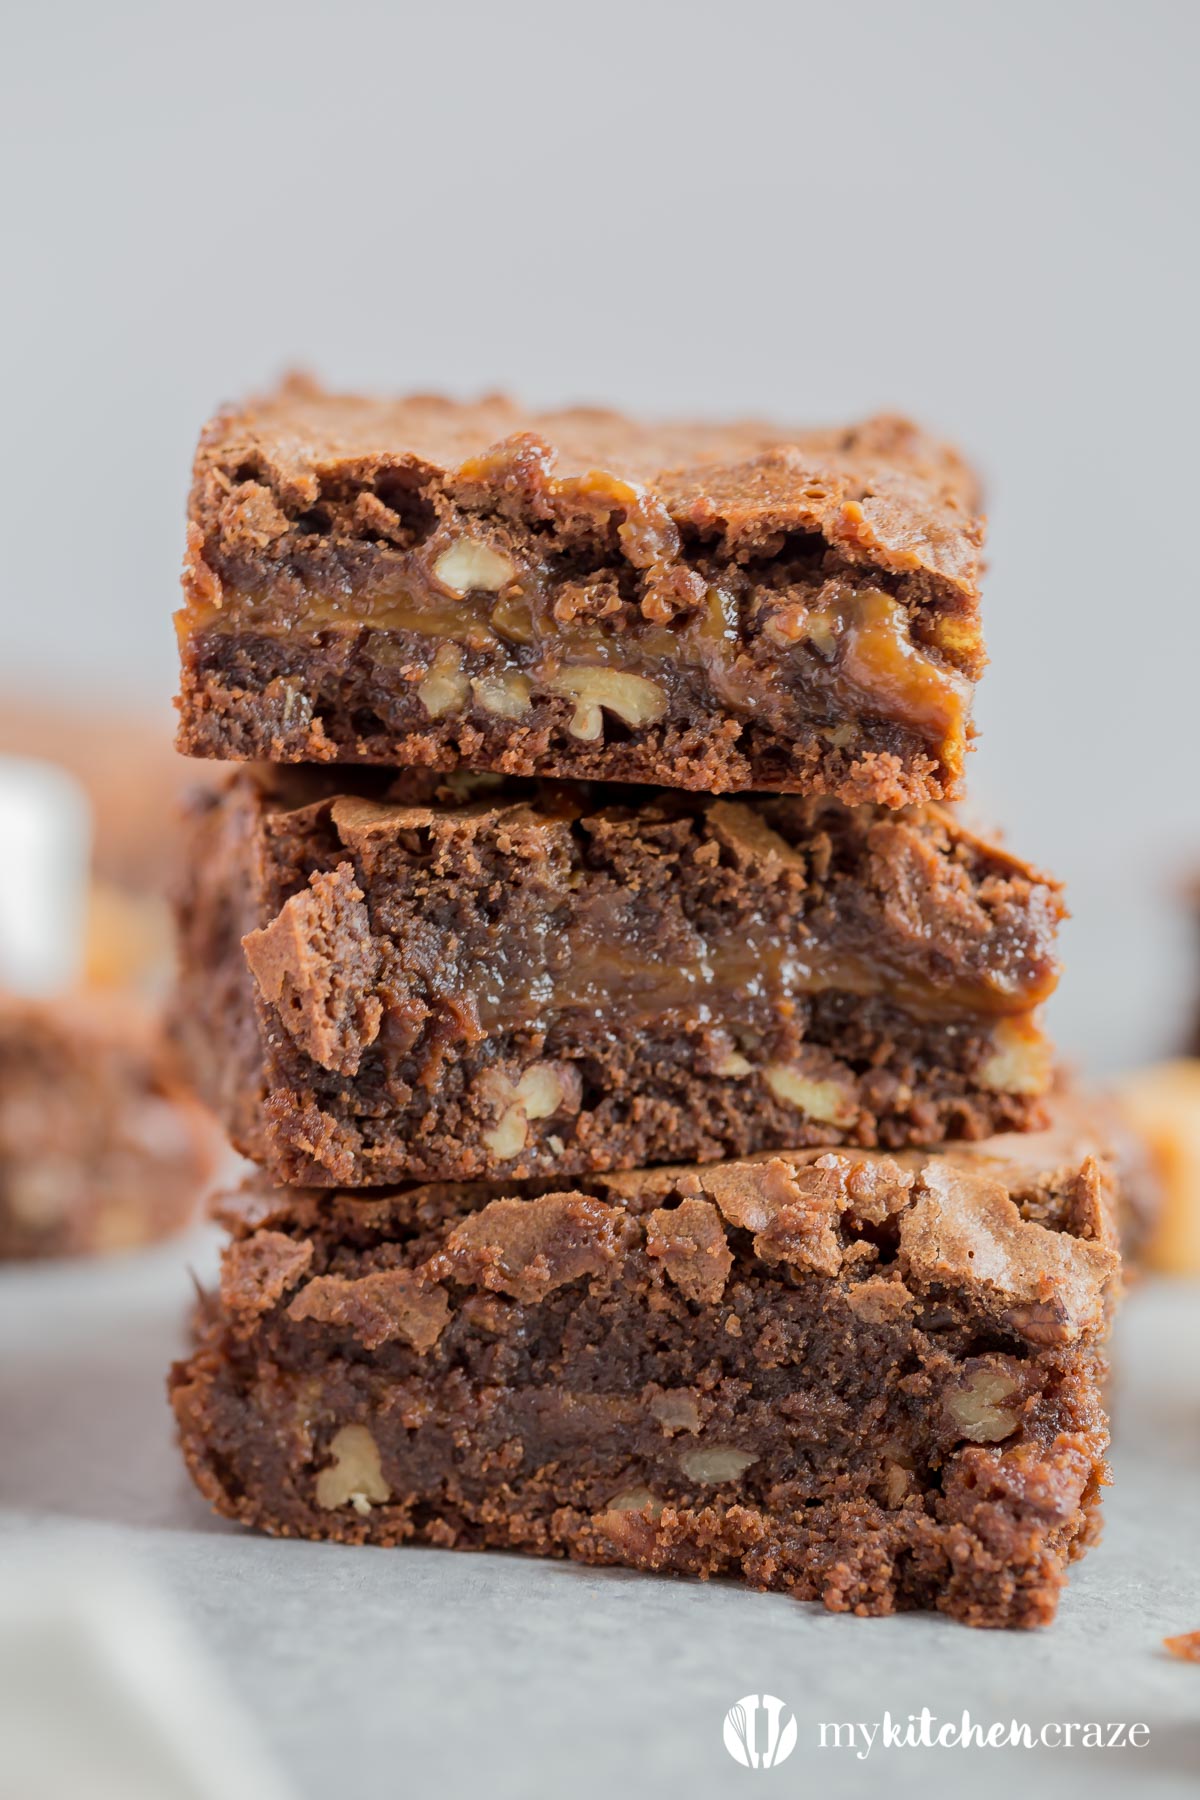 Caramel Pecan Brownies are soft, chewy, chocolate-y with caramel and pecans. These take regular brownies to the next level!